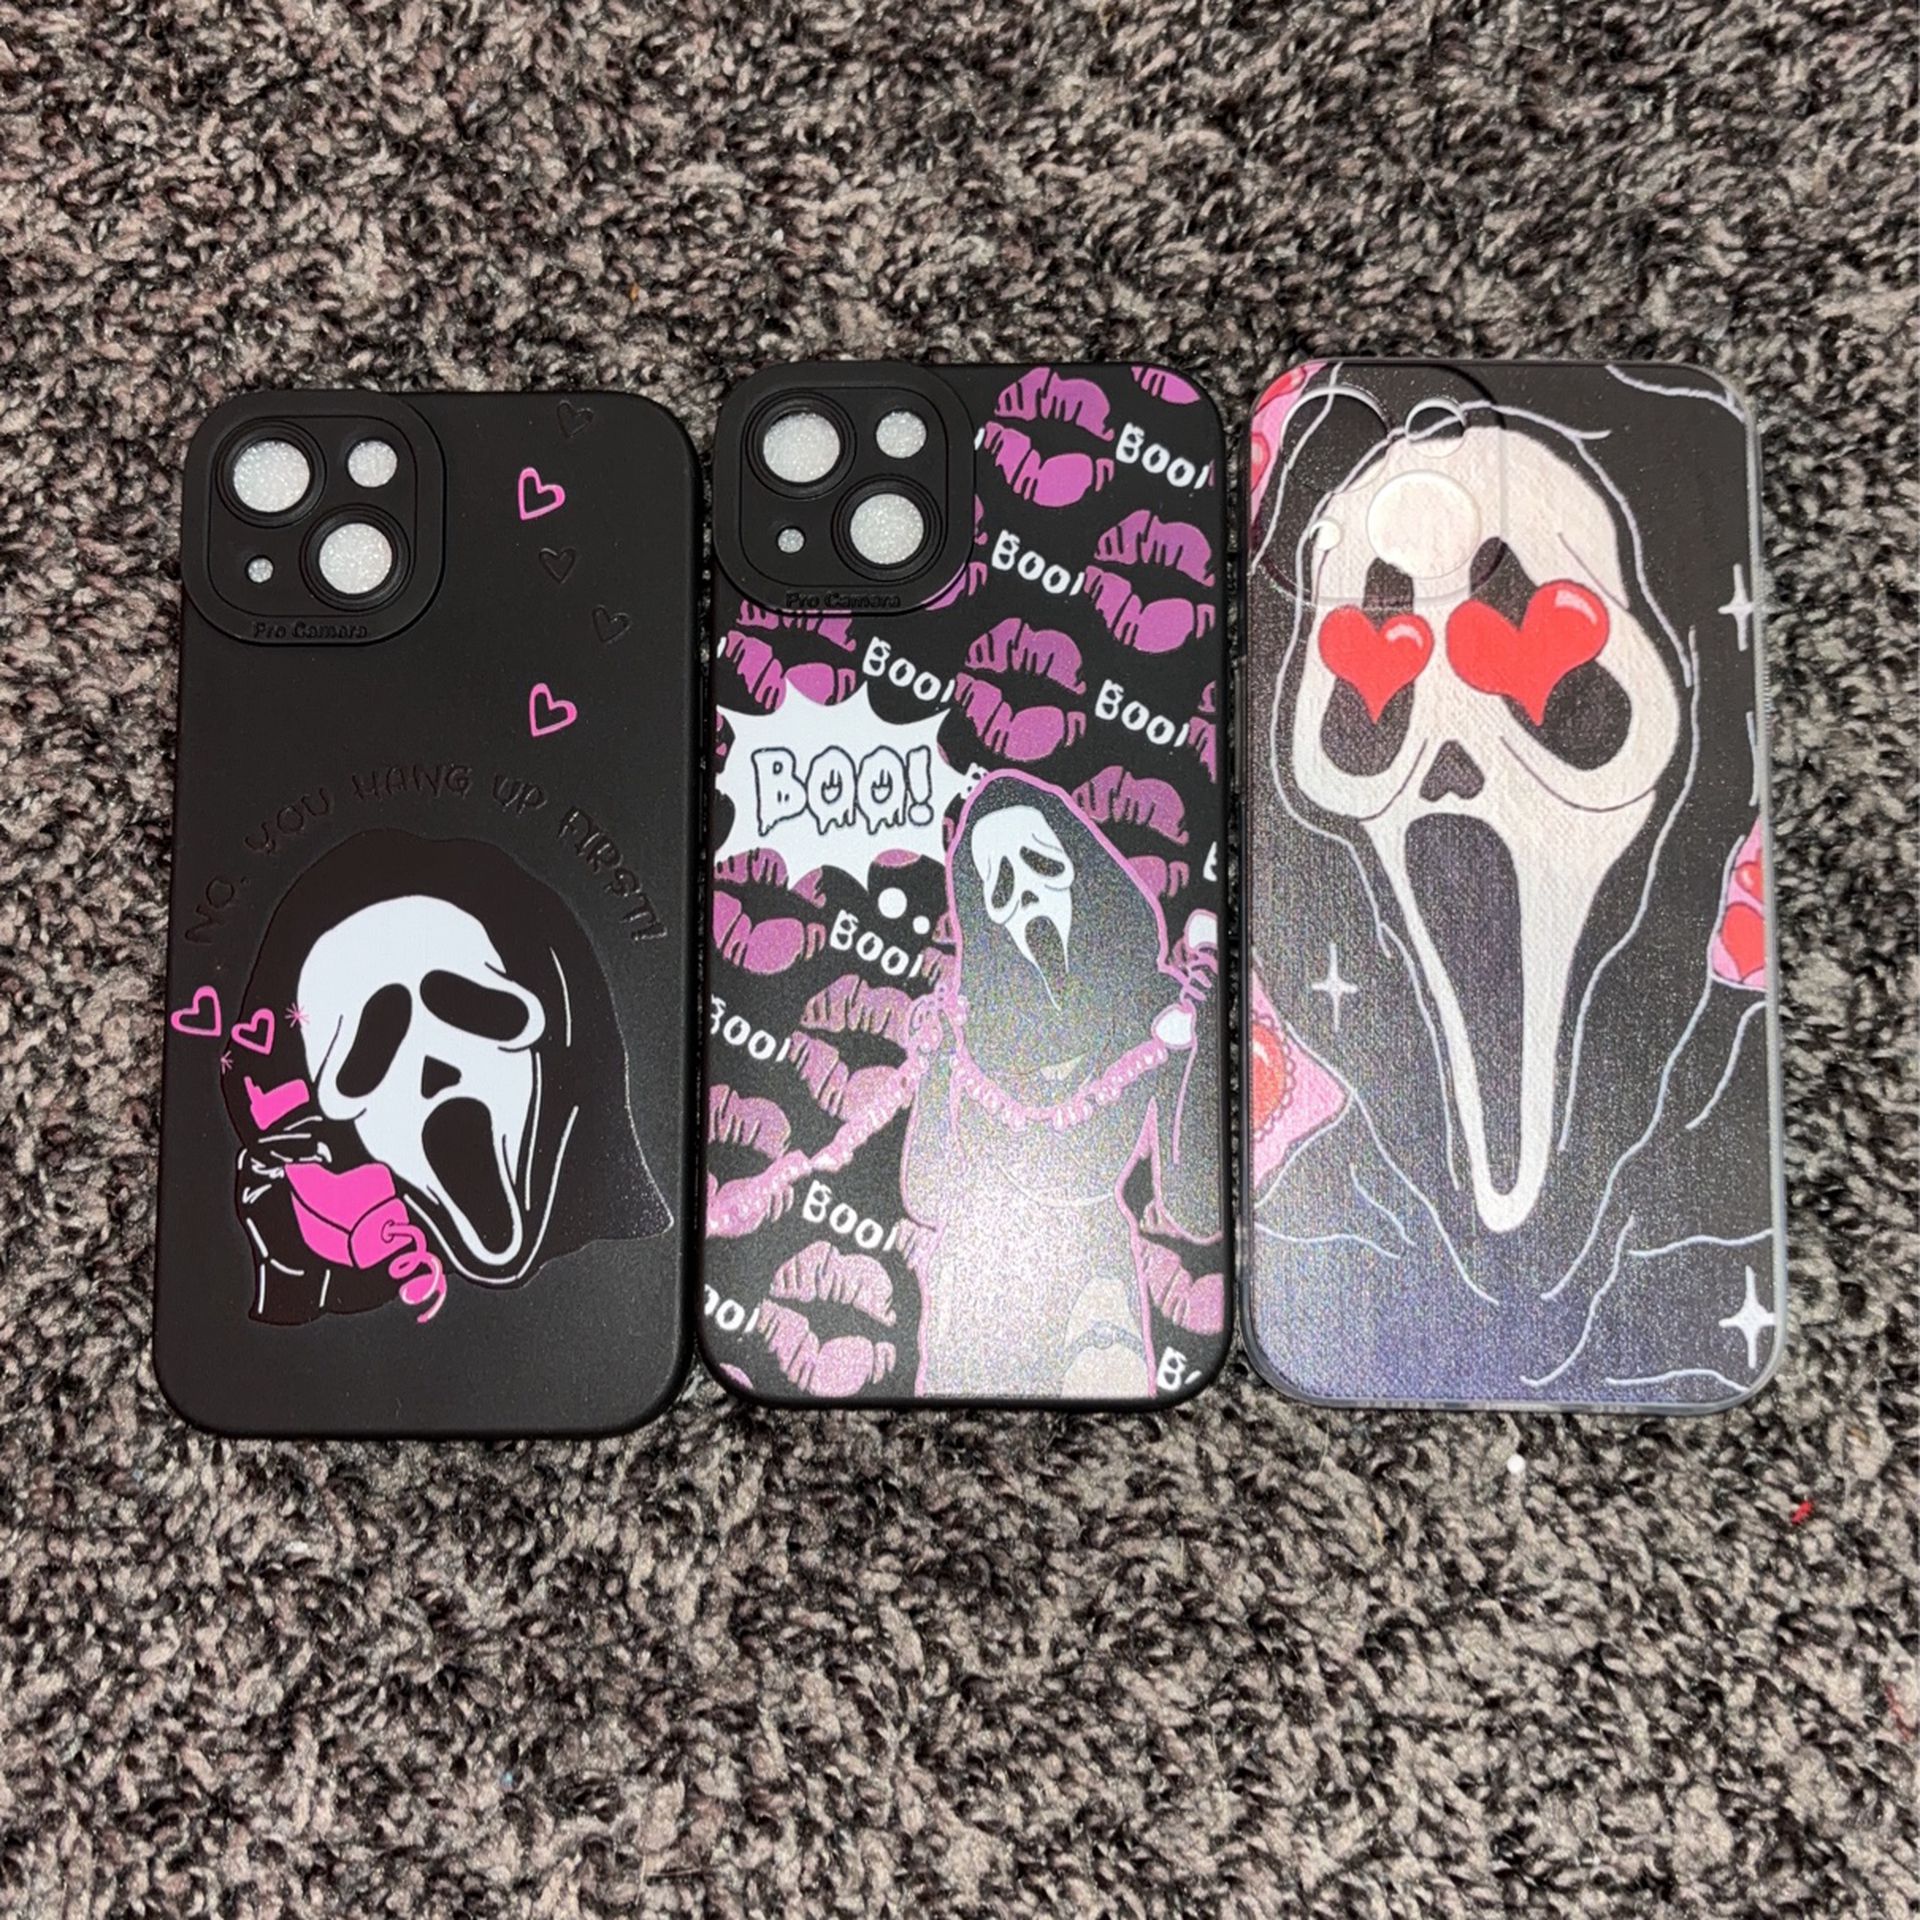 iPhone Covers Cases